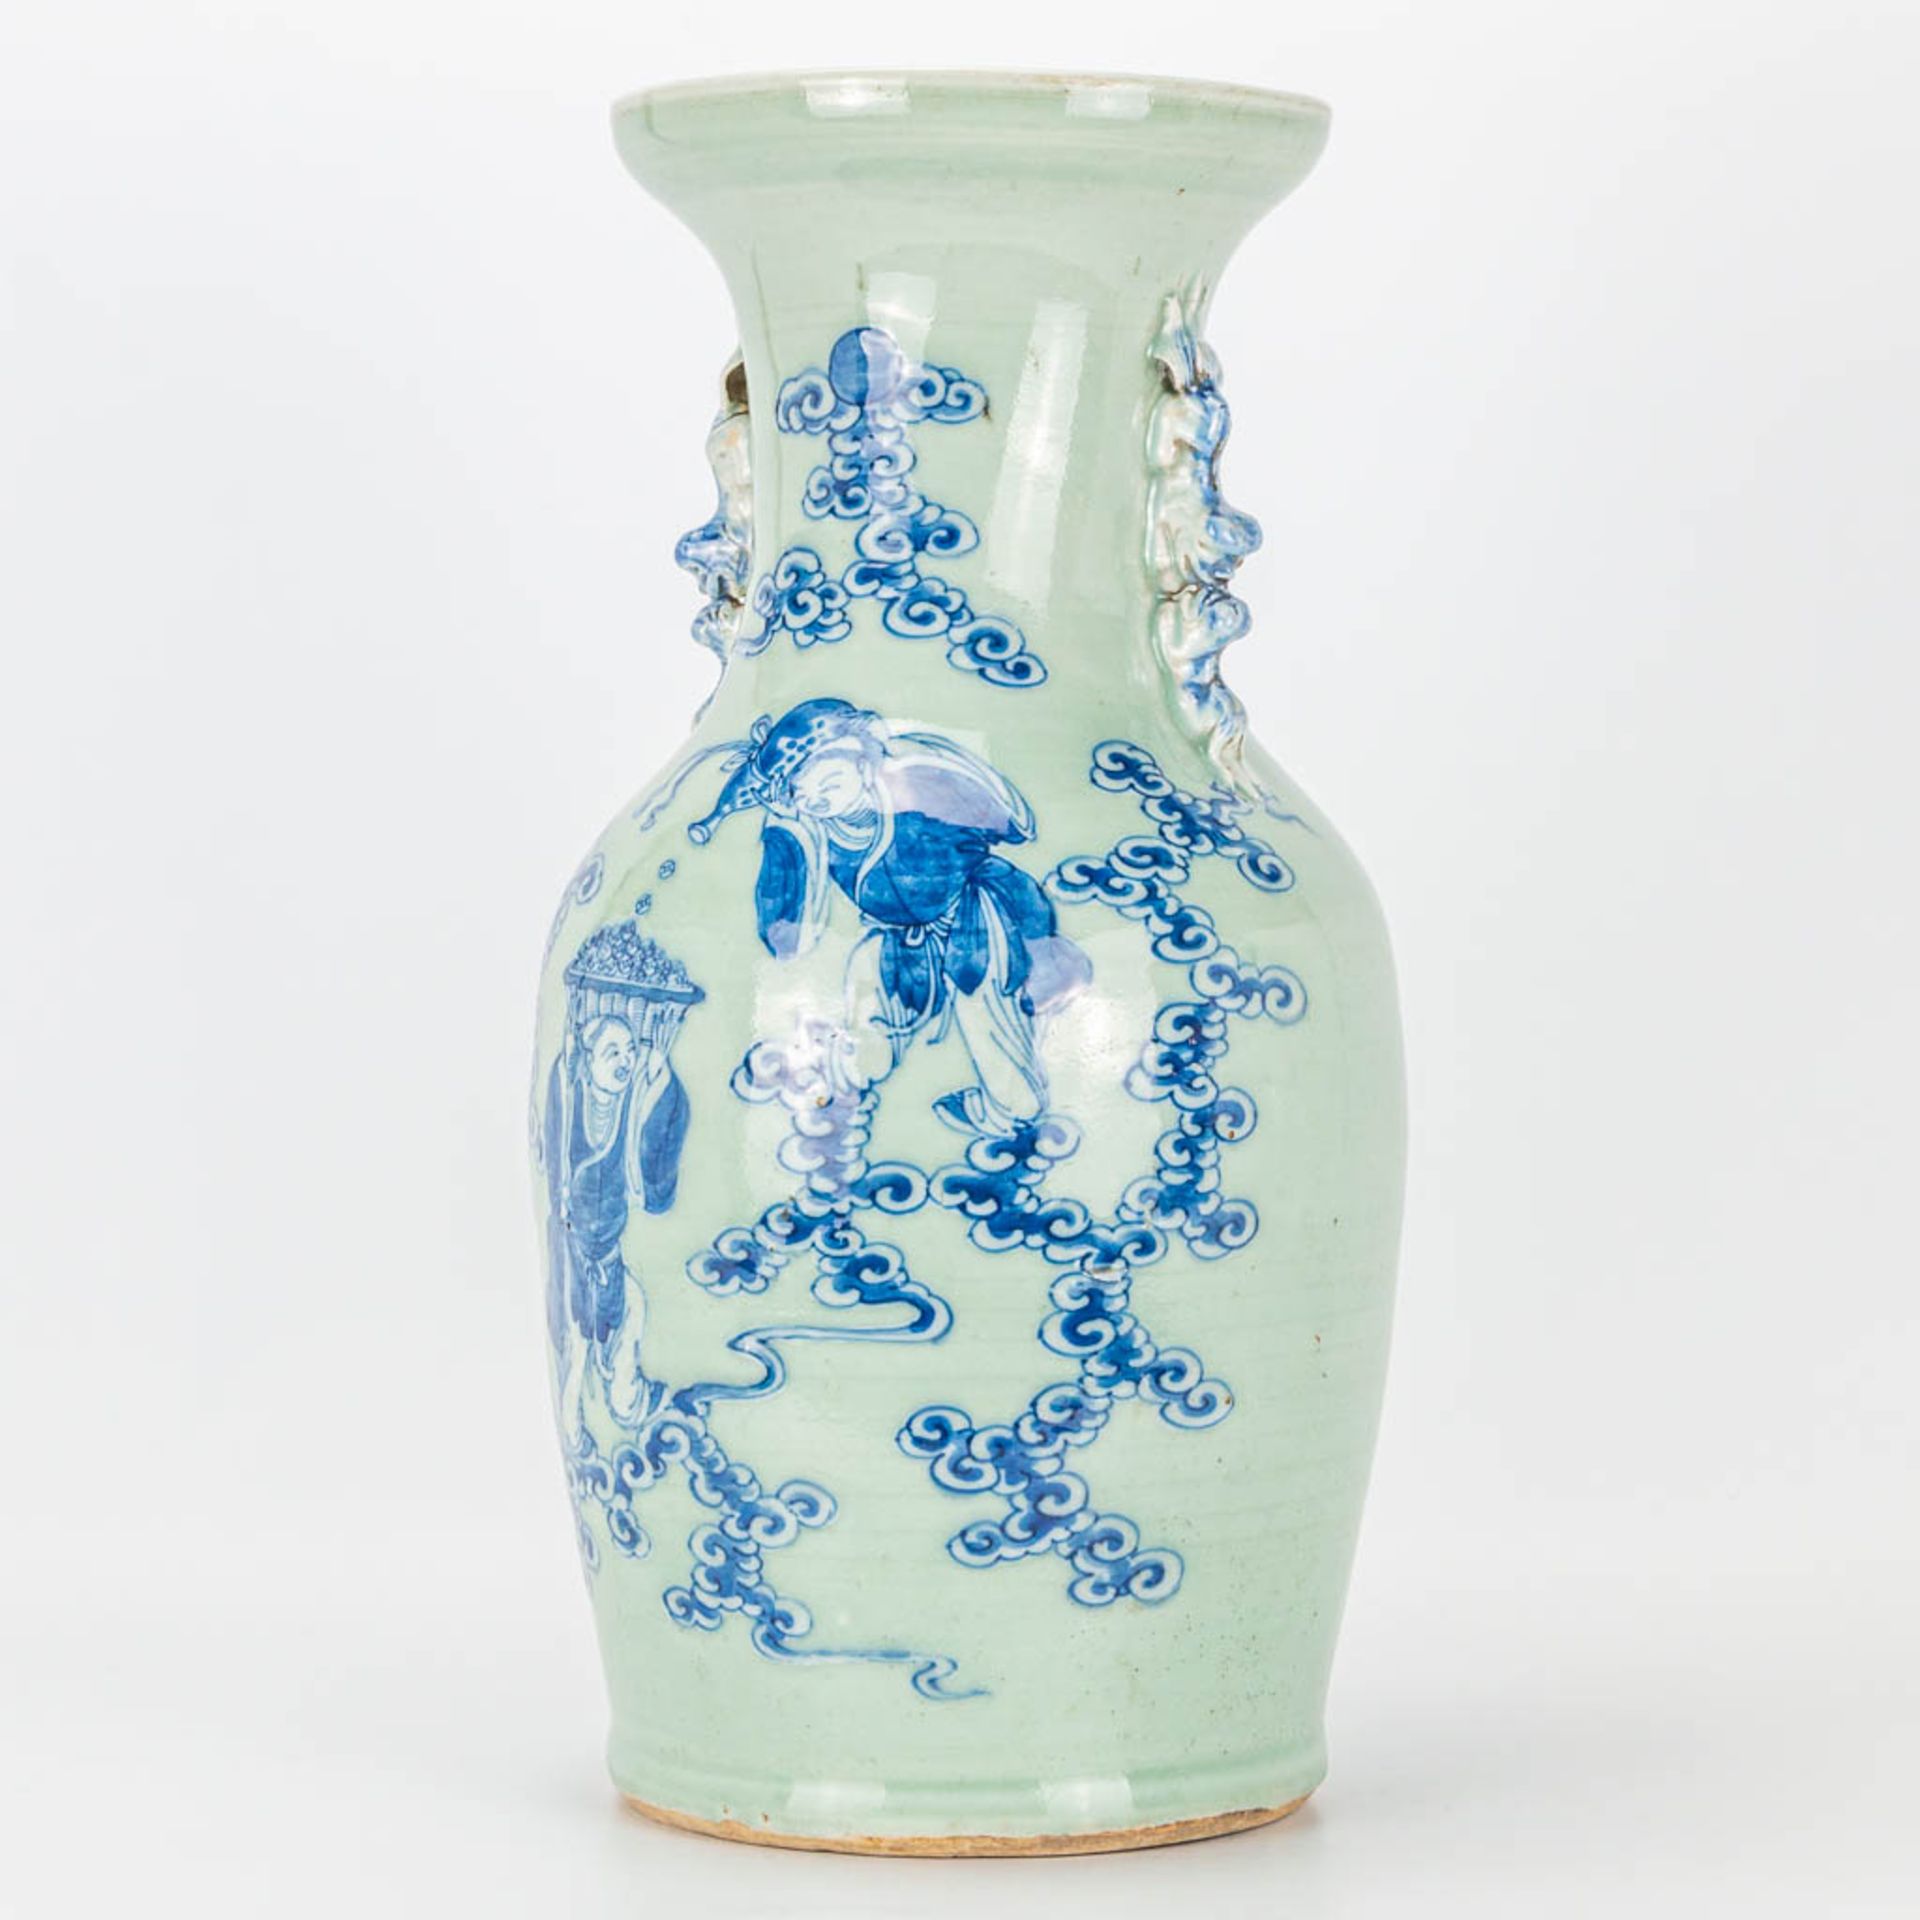 A vase made of Chinese porcelain with a blue-white decor. 19th/20th century. - Image 9 of 14